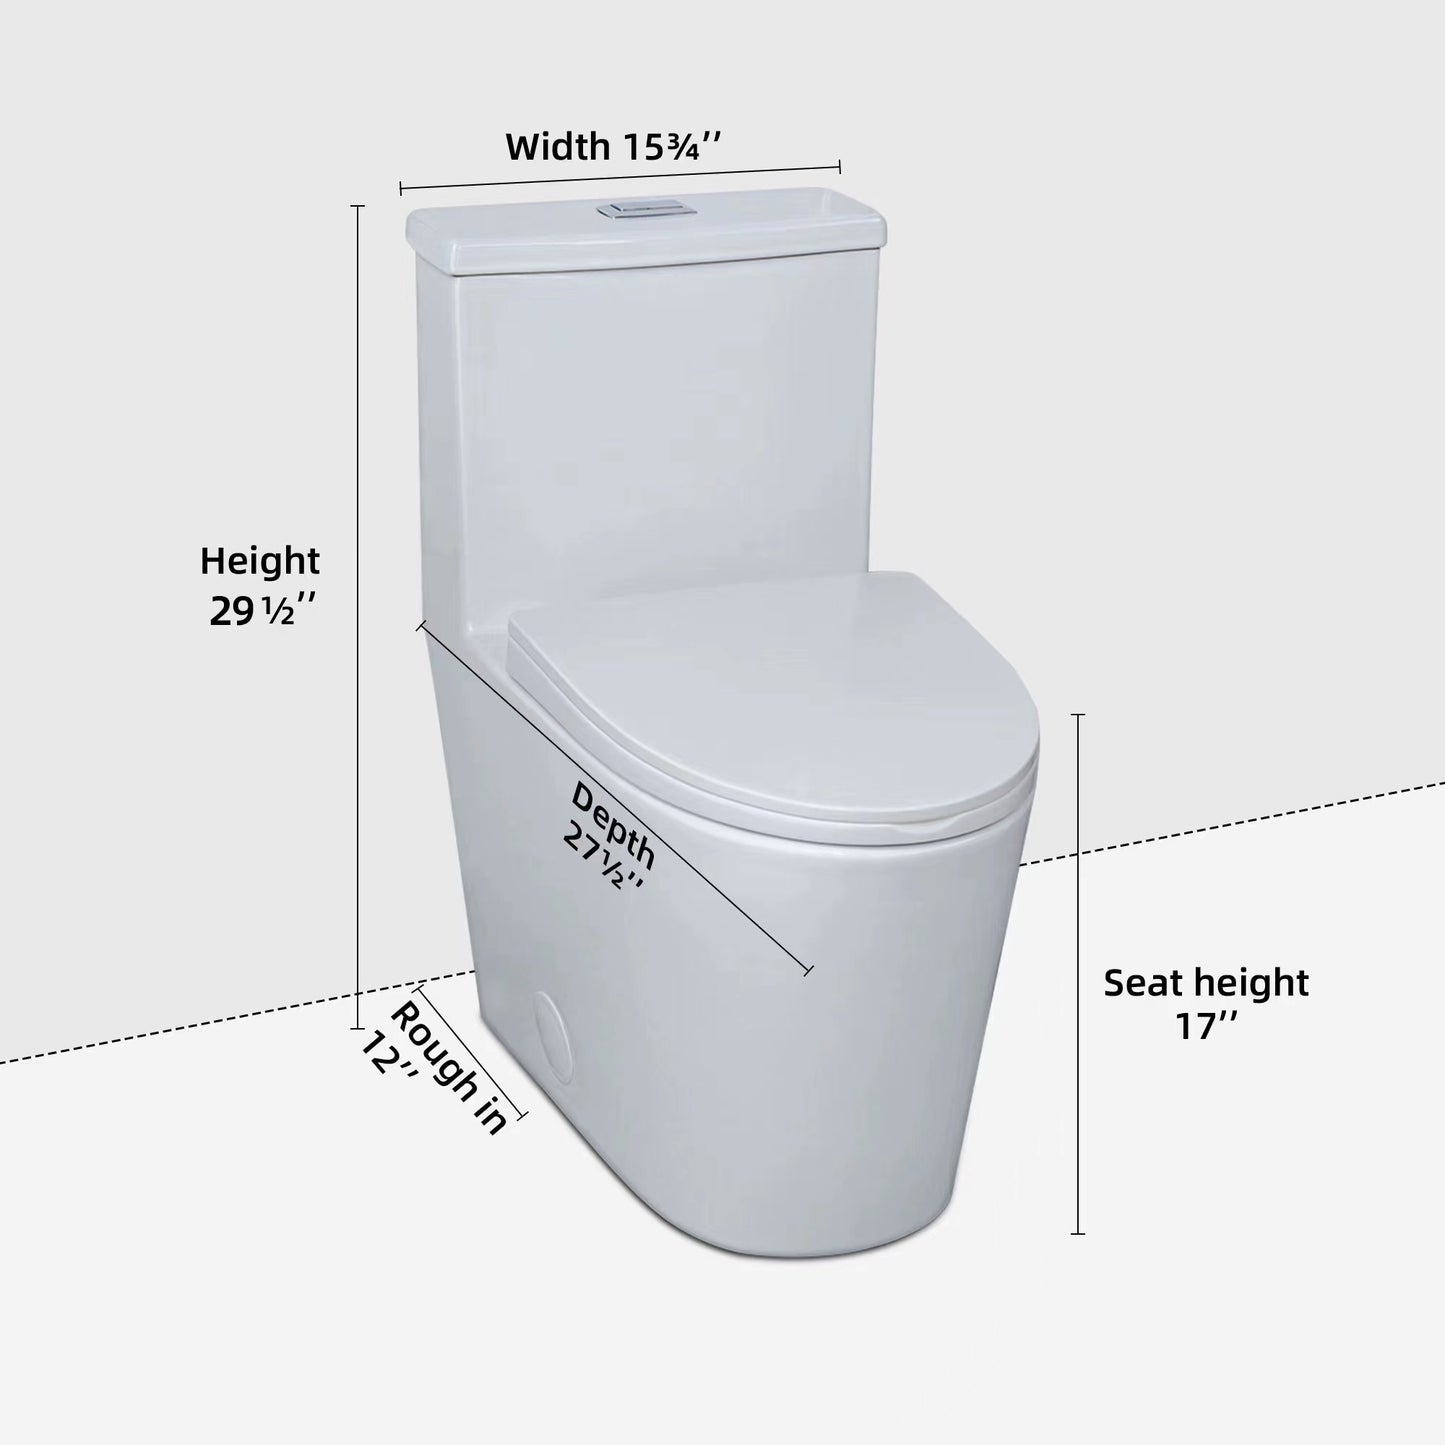 Casta Diva Elongated One-Piece Toilet Dual Flush Skirted Toilet with Soft Close Toilet Seat, White CD-T001